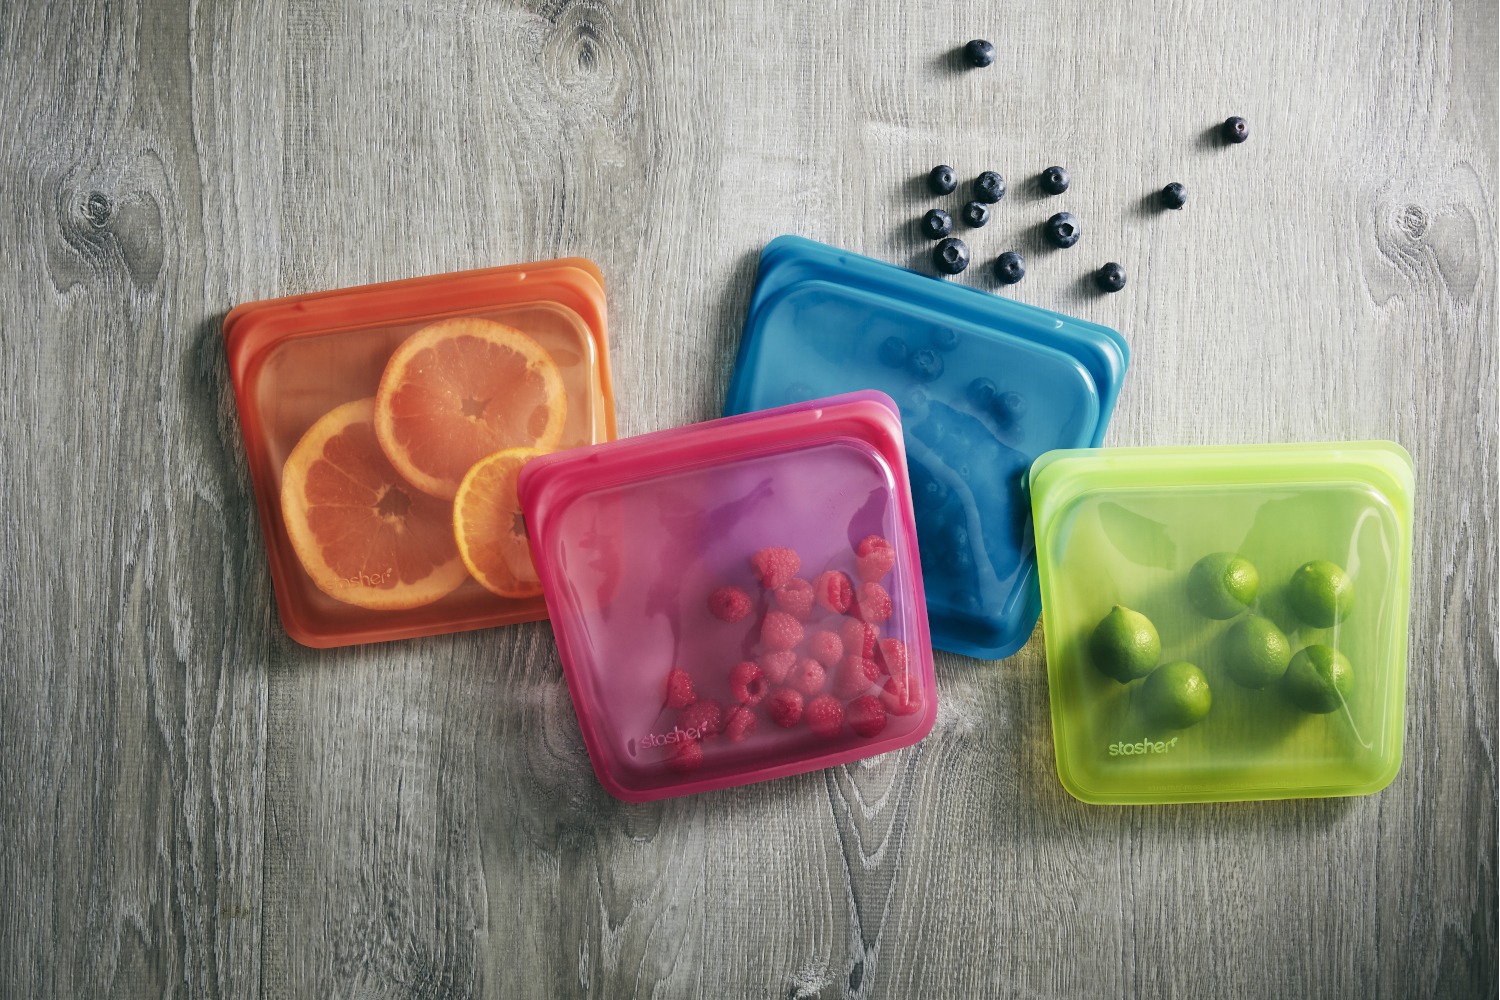 Stasher vs. Ziploc Endurables: What are the best reusable food storage bags?